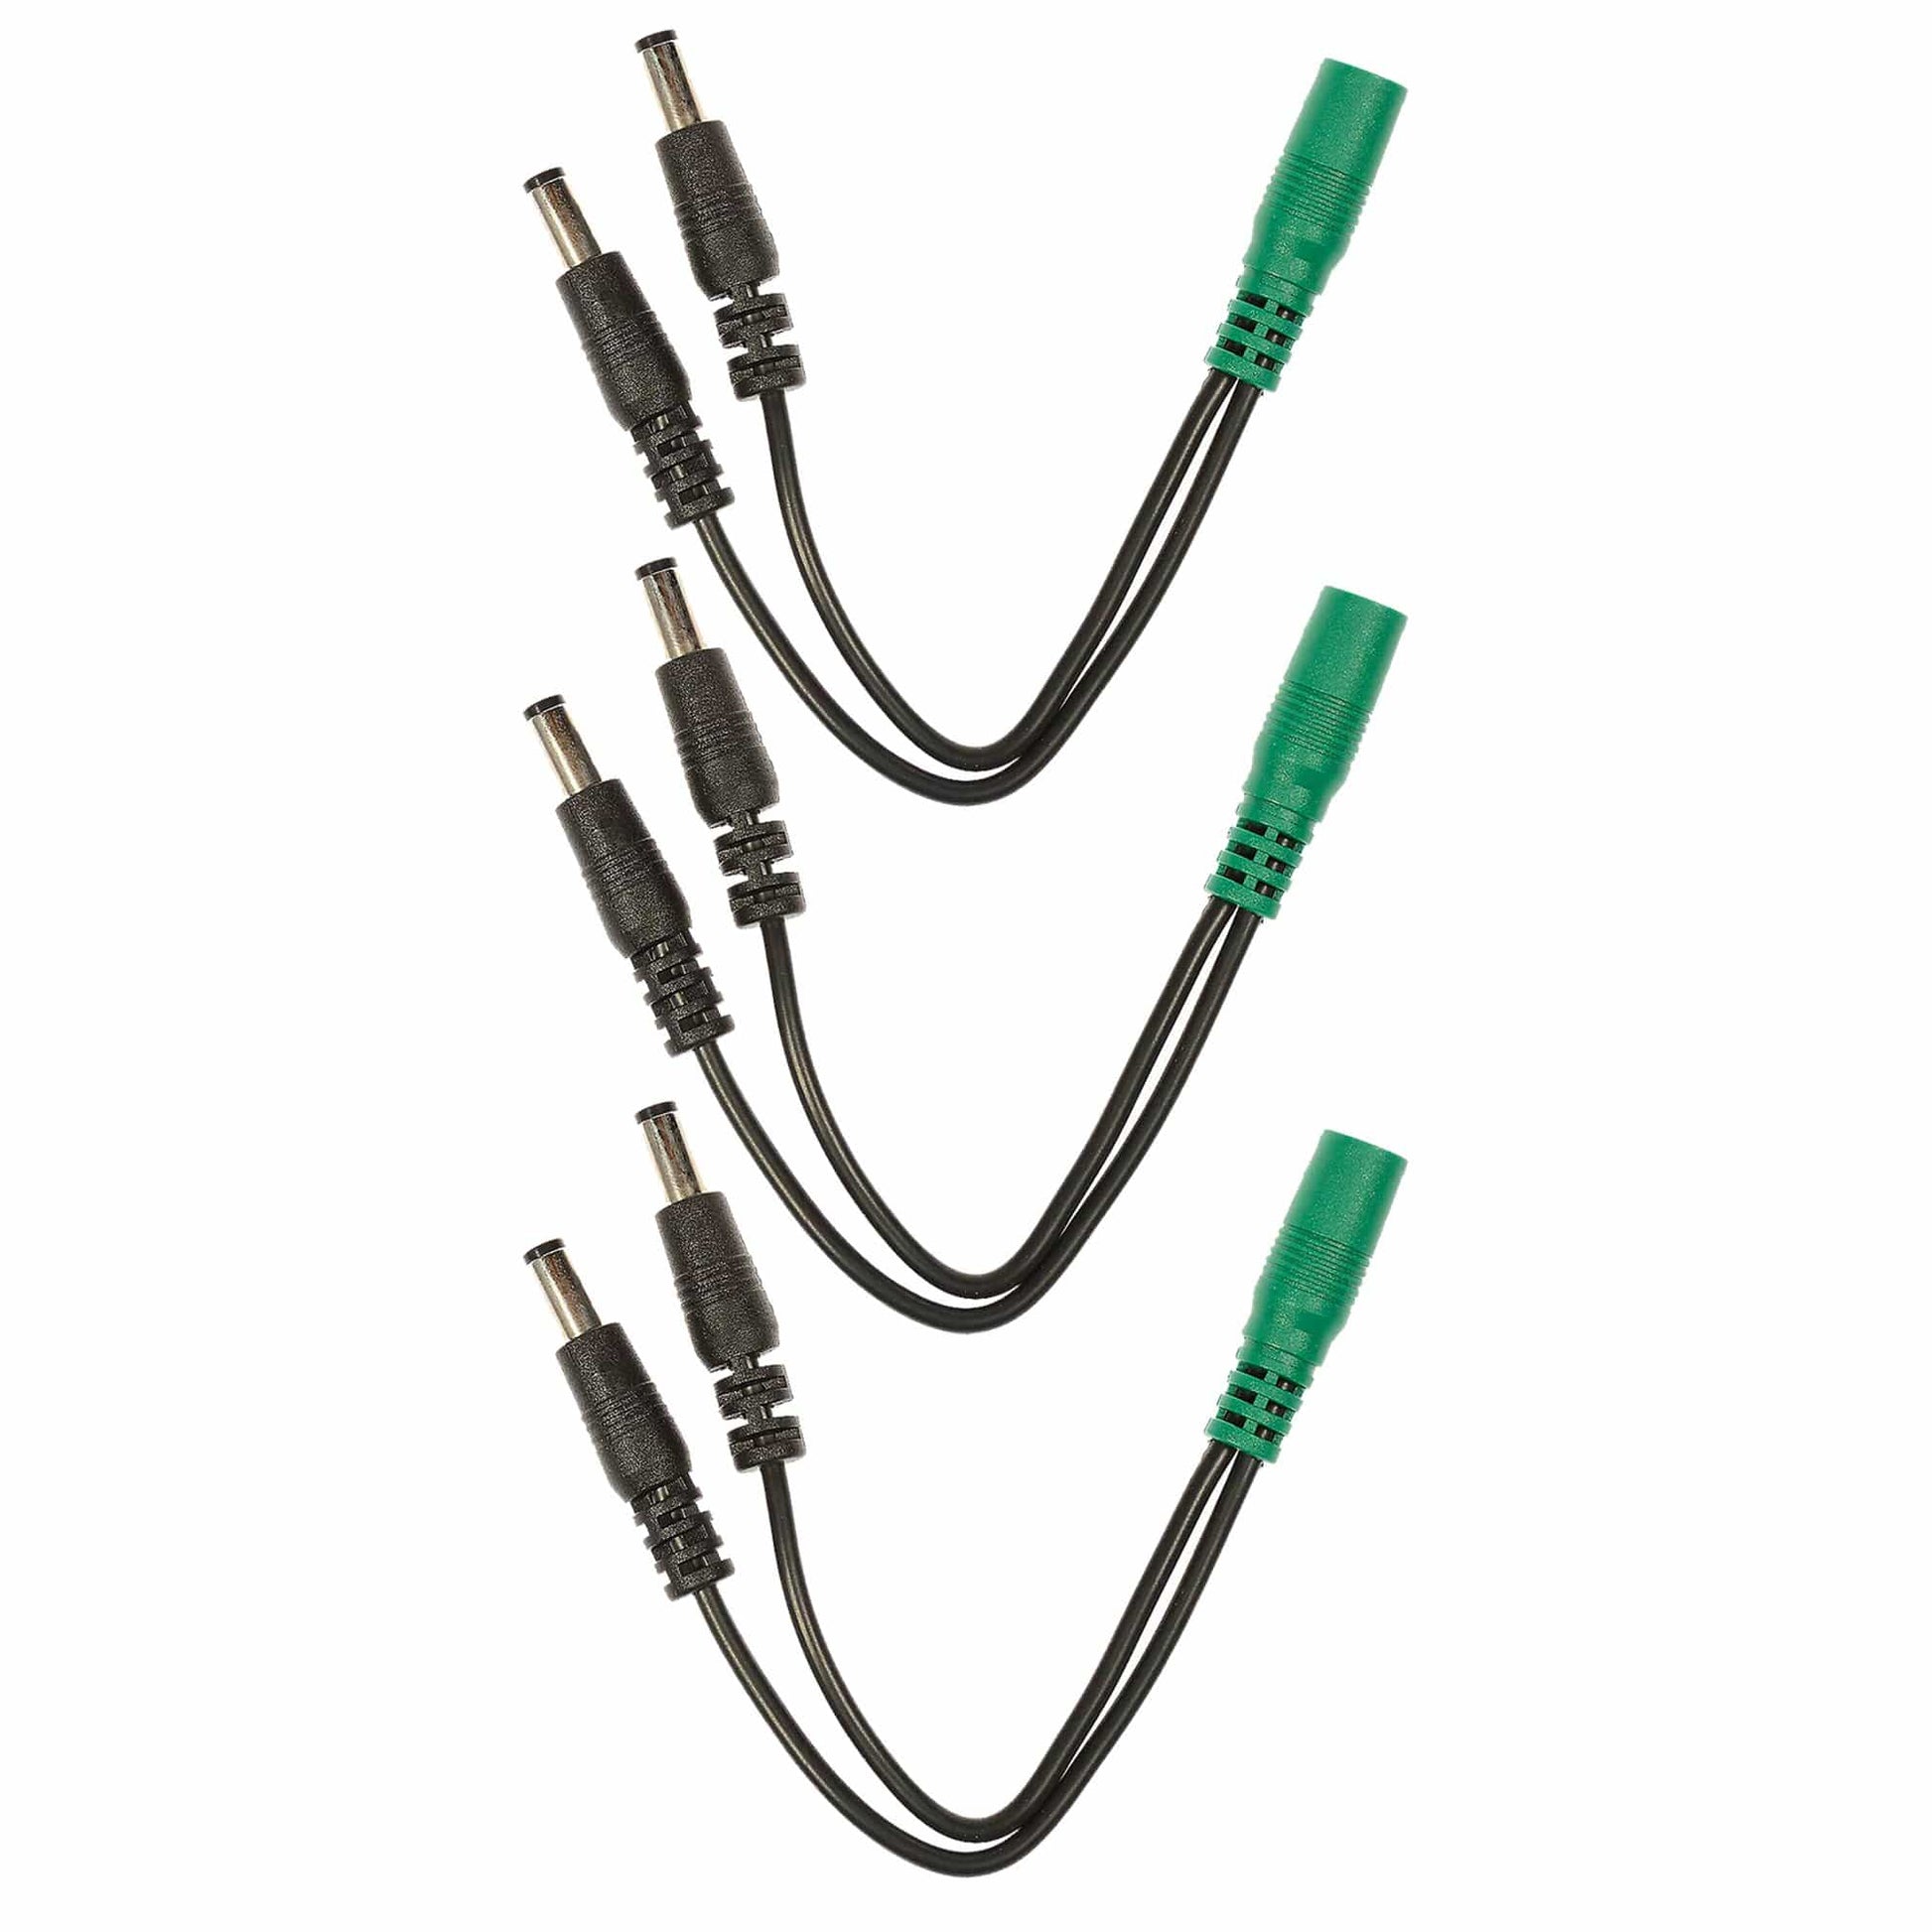 Voodoo Lab Cable Current Doubler Adapter - Two 2.1mm Straight Barrels - 2.1mm Female 4" 3 Pack Bundle Accessories / Cables